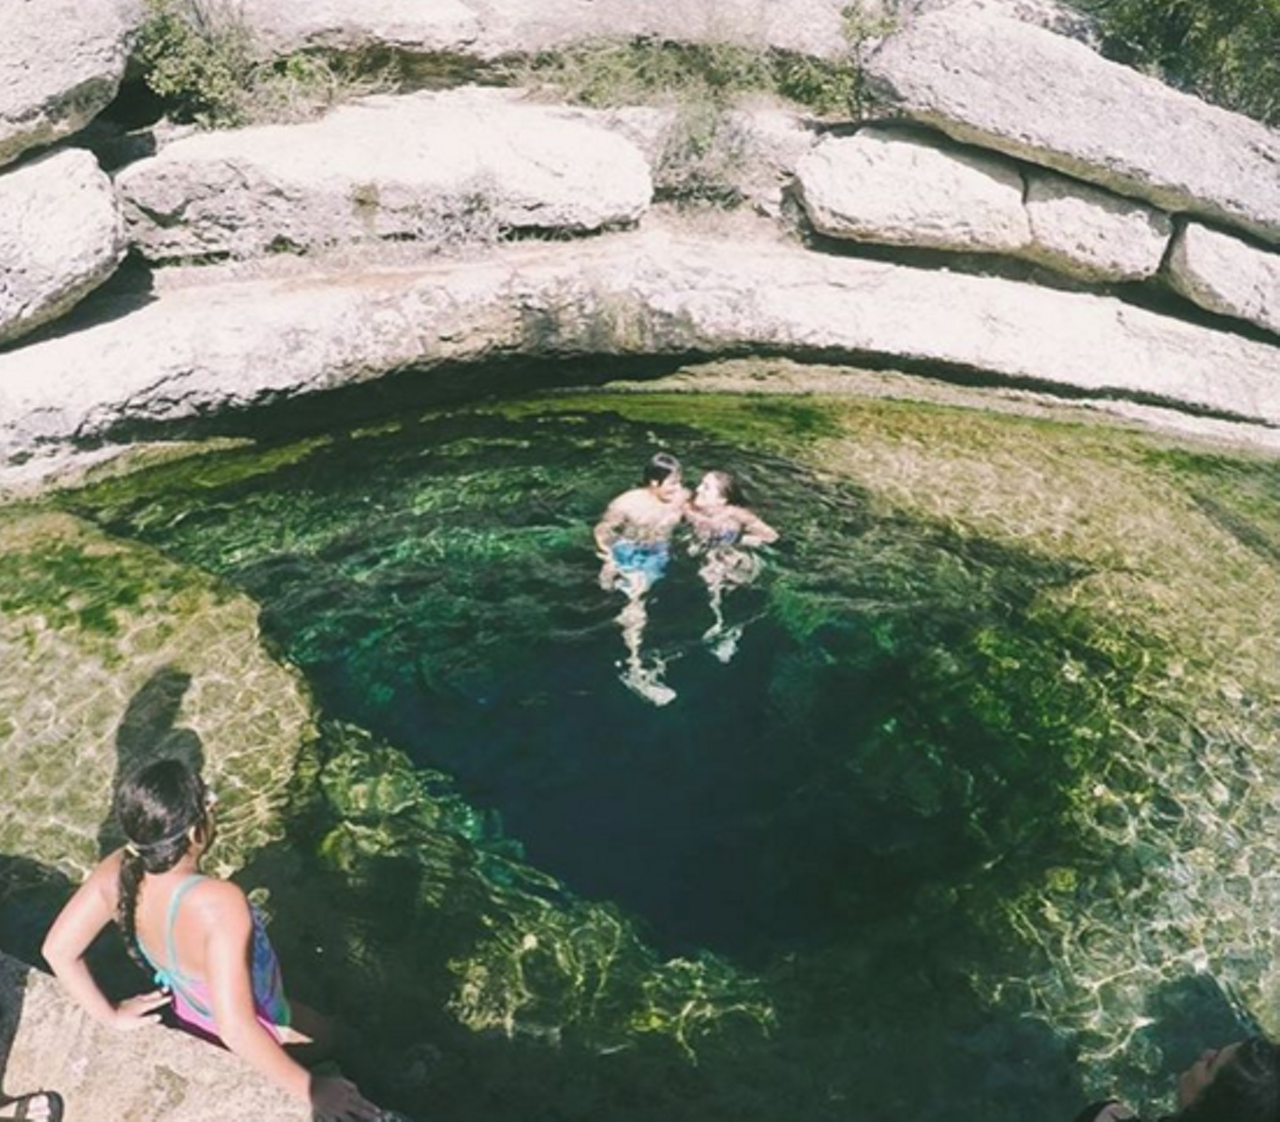 Jacob's Well
Located in Wimberly about an hour out, Jacob's Well is a spot that should be on your summer bucket list. Every summer. 
Photo via Instagram/lisaelektra